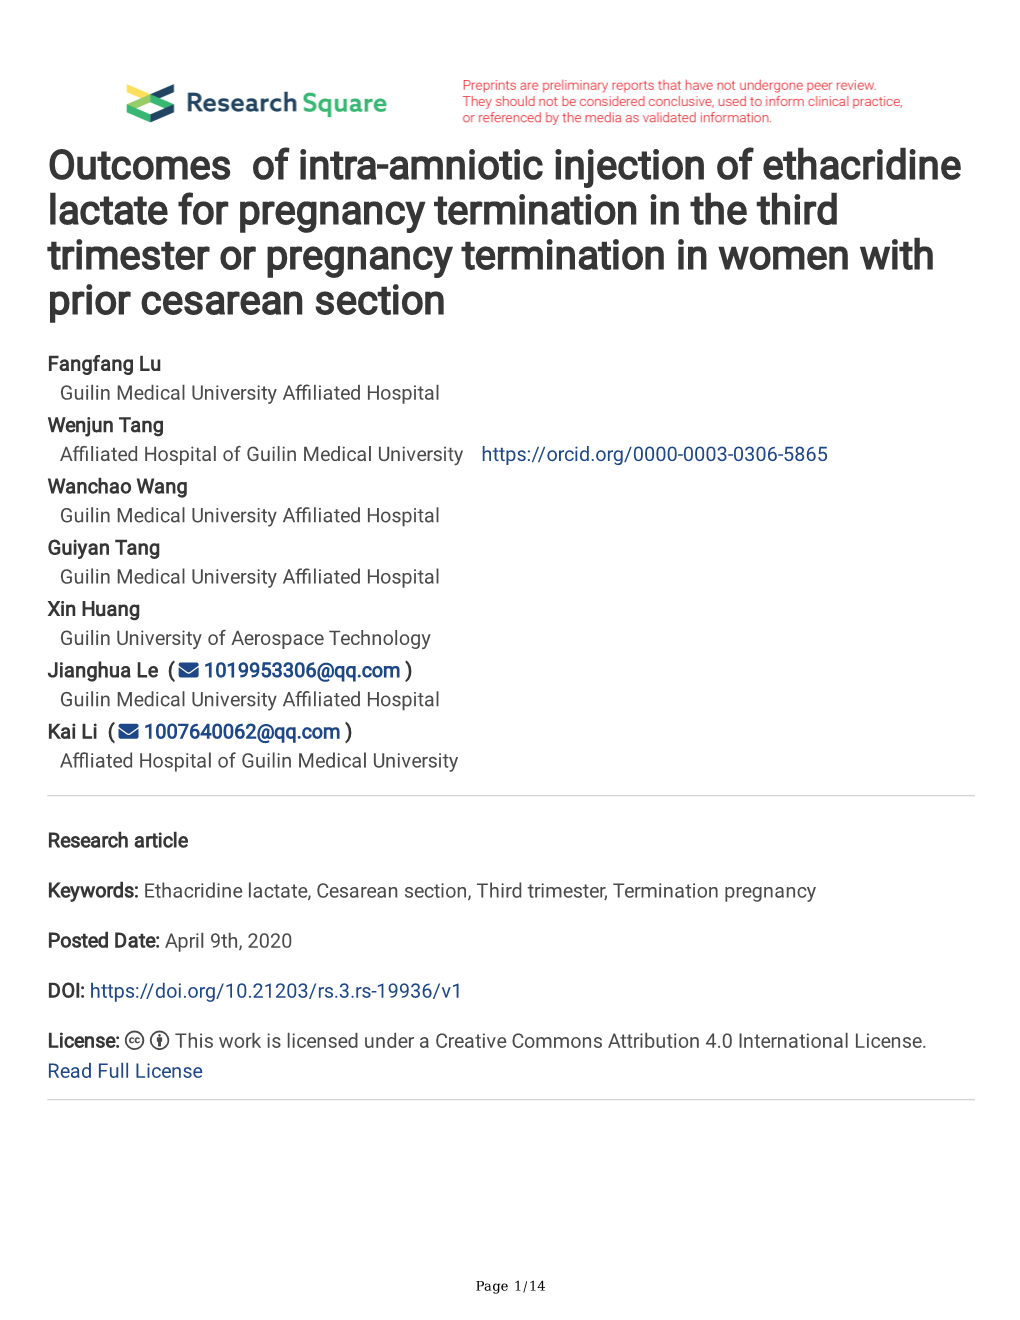 Outcomes of Intra-Amniotic Injection of Ethacridine Lactate for Pregnancy Termination in the Third Trimester Or Pregnancy Term